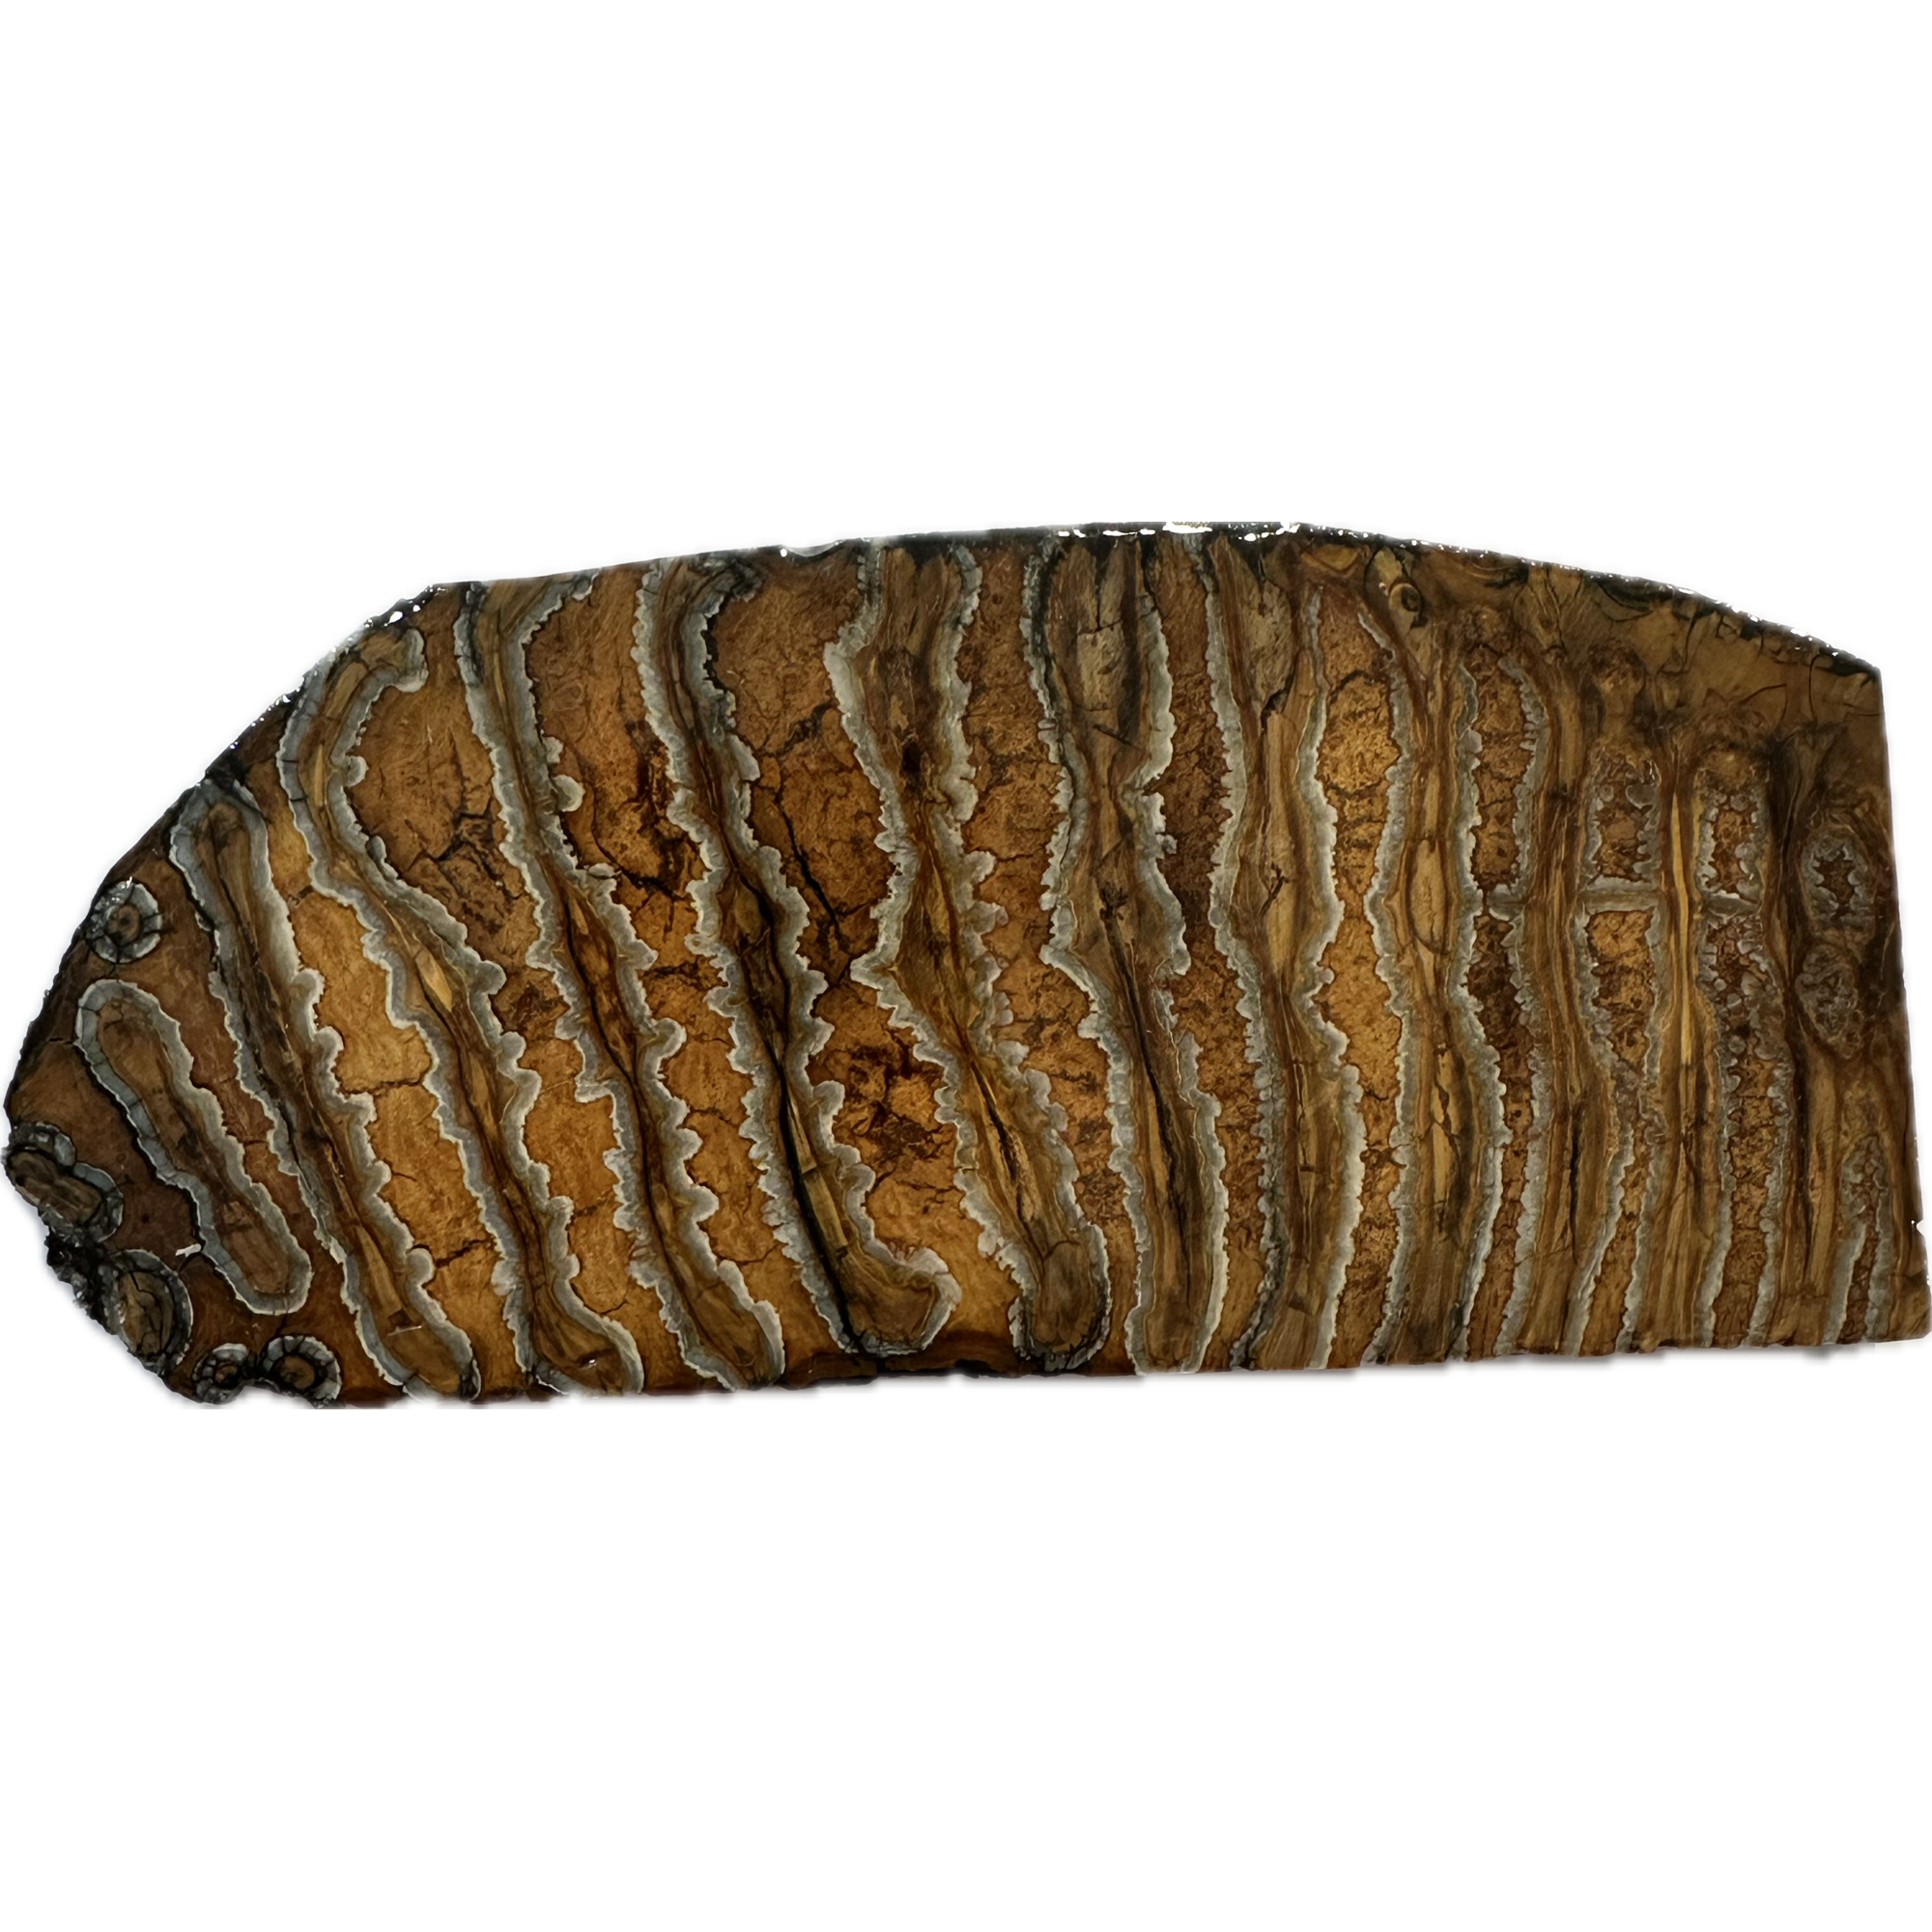 Woolly Mammoth Tooth slice Prehistoric Online